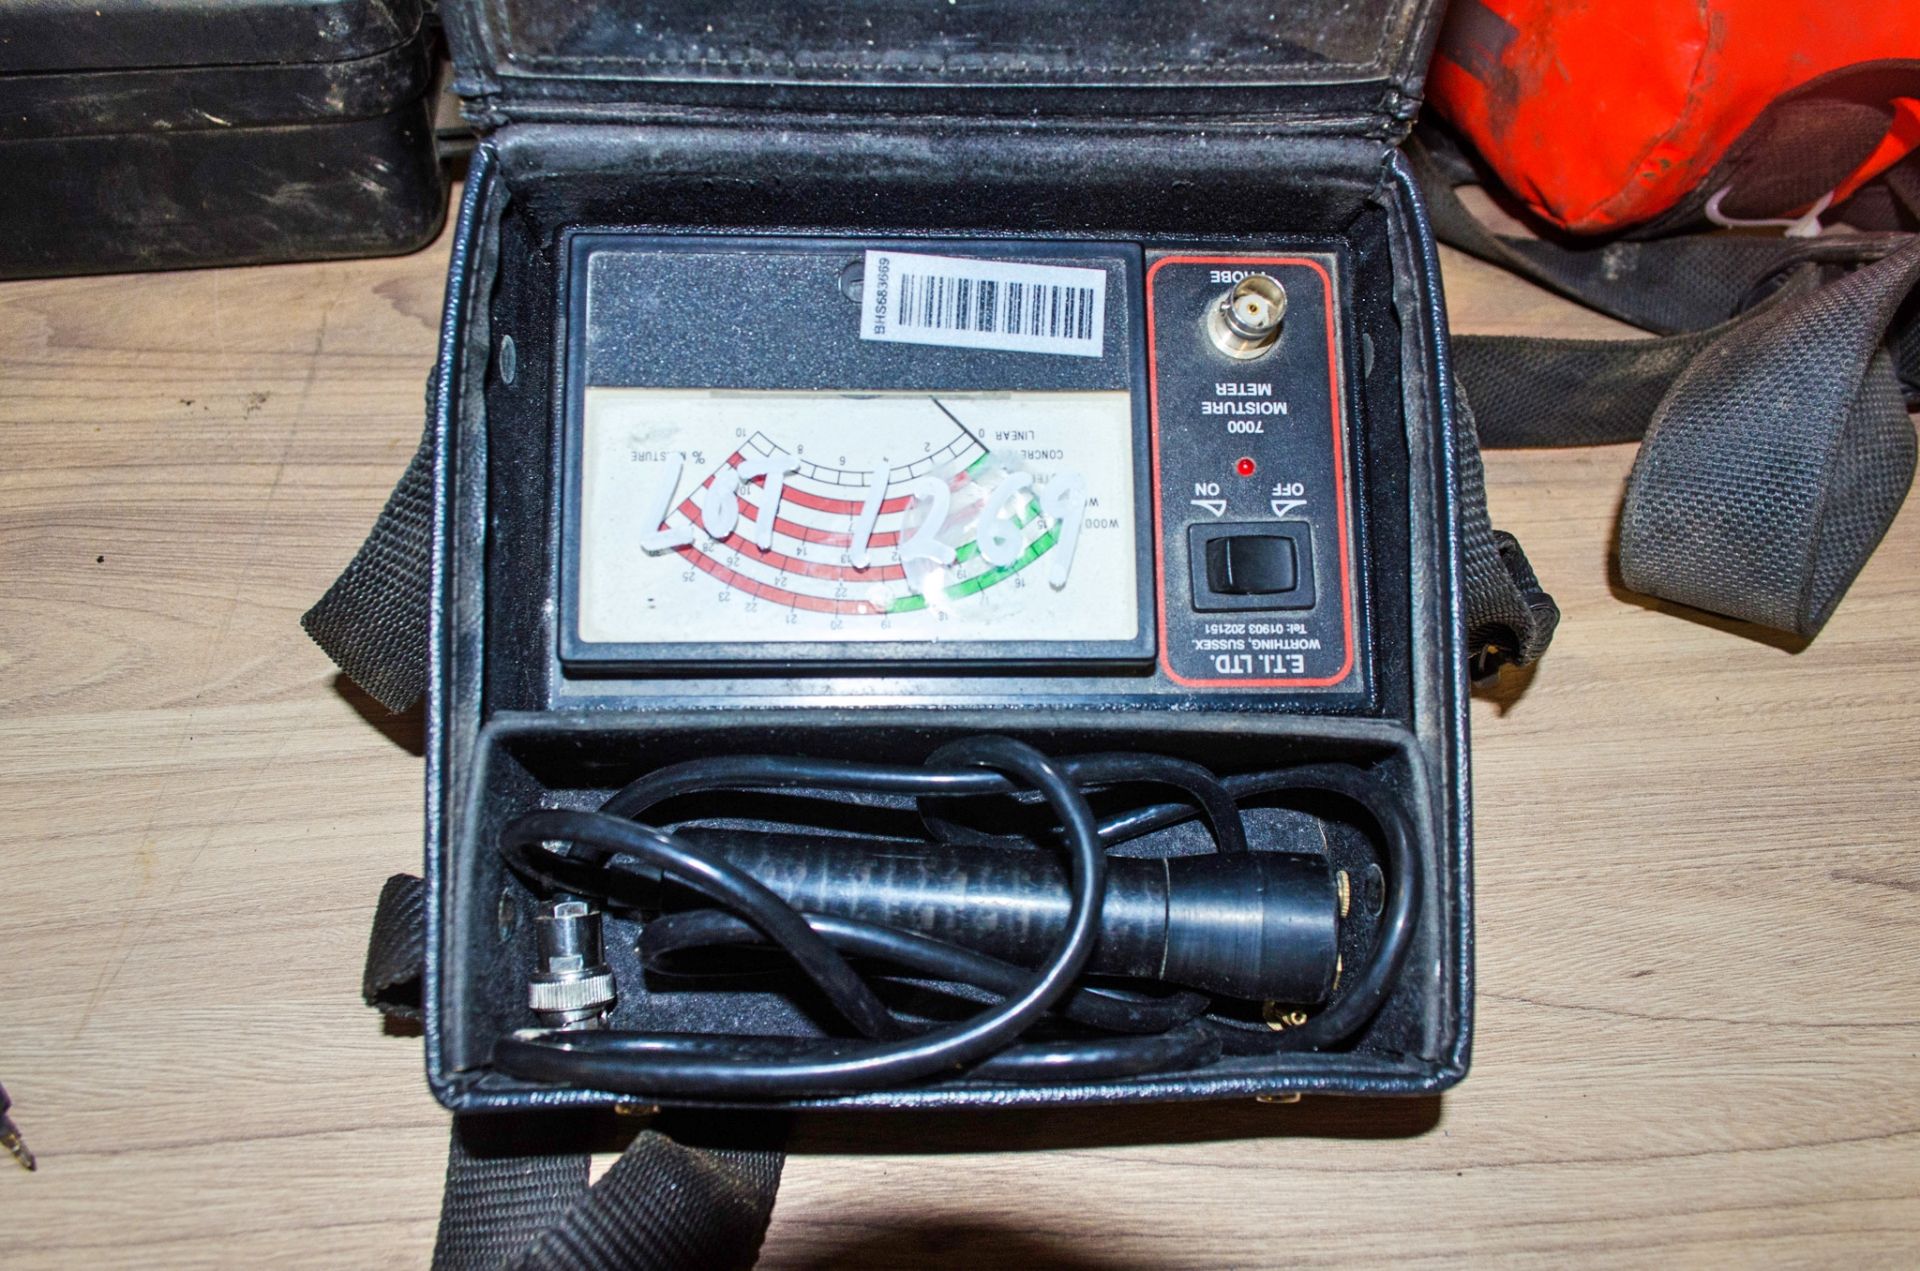 Honeywell gas detector c/w charging base and carry case